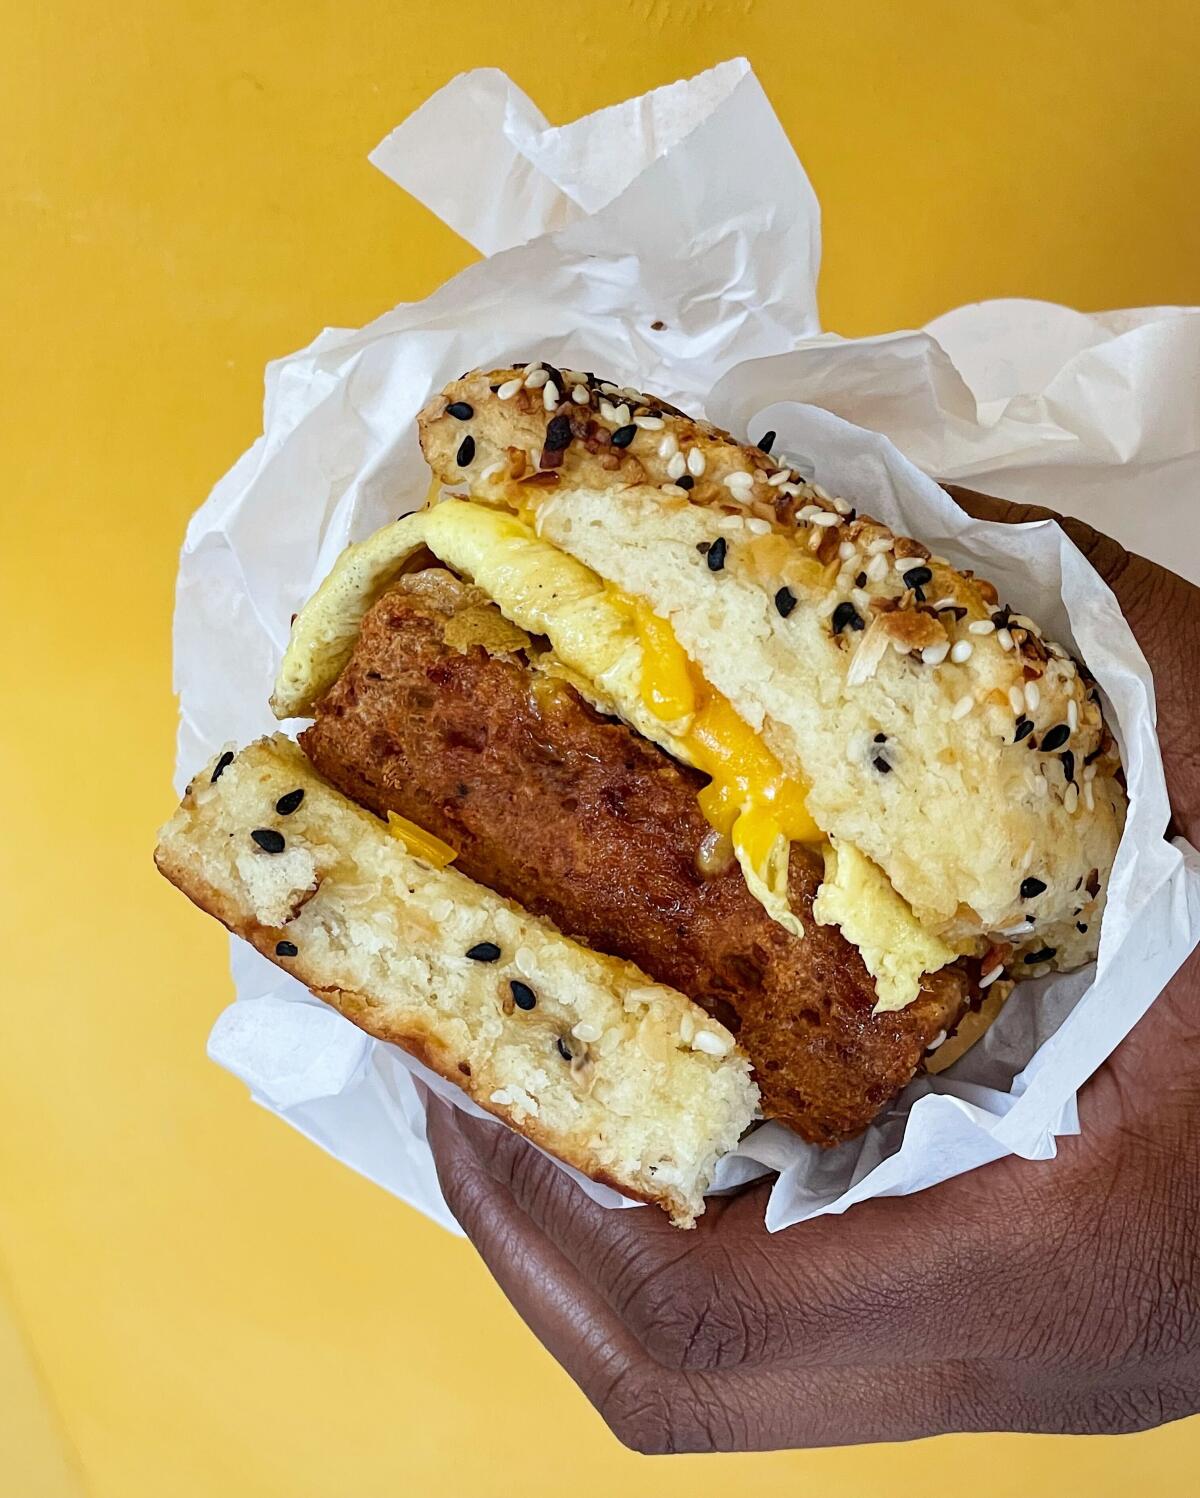 A breakfast sandwich of eggs, cheese and chicken sausage  at Auntie Beulah’s.